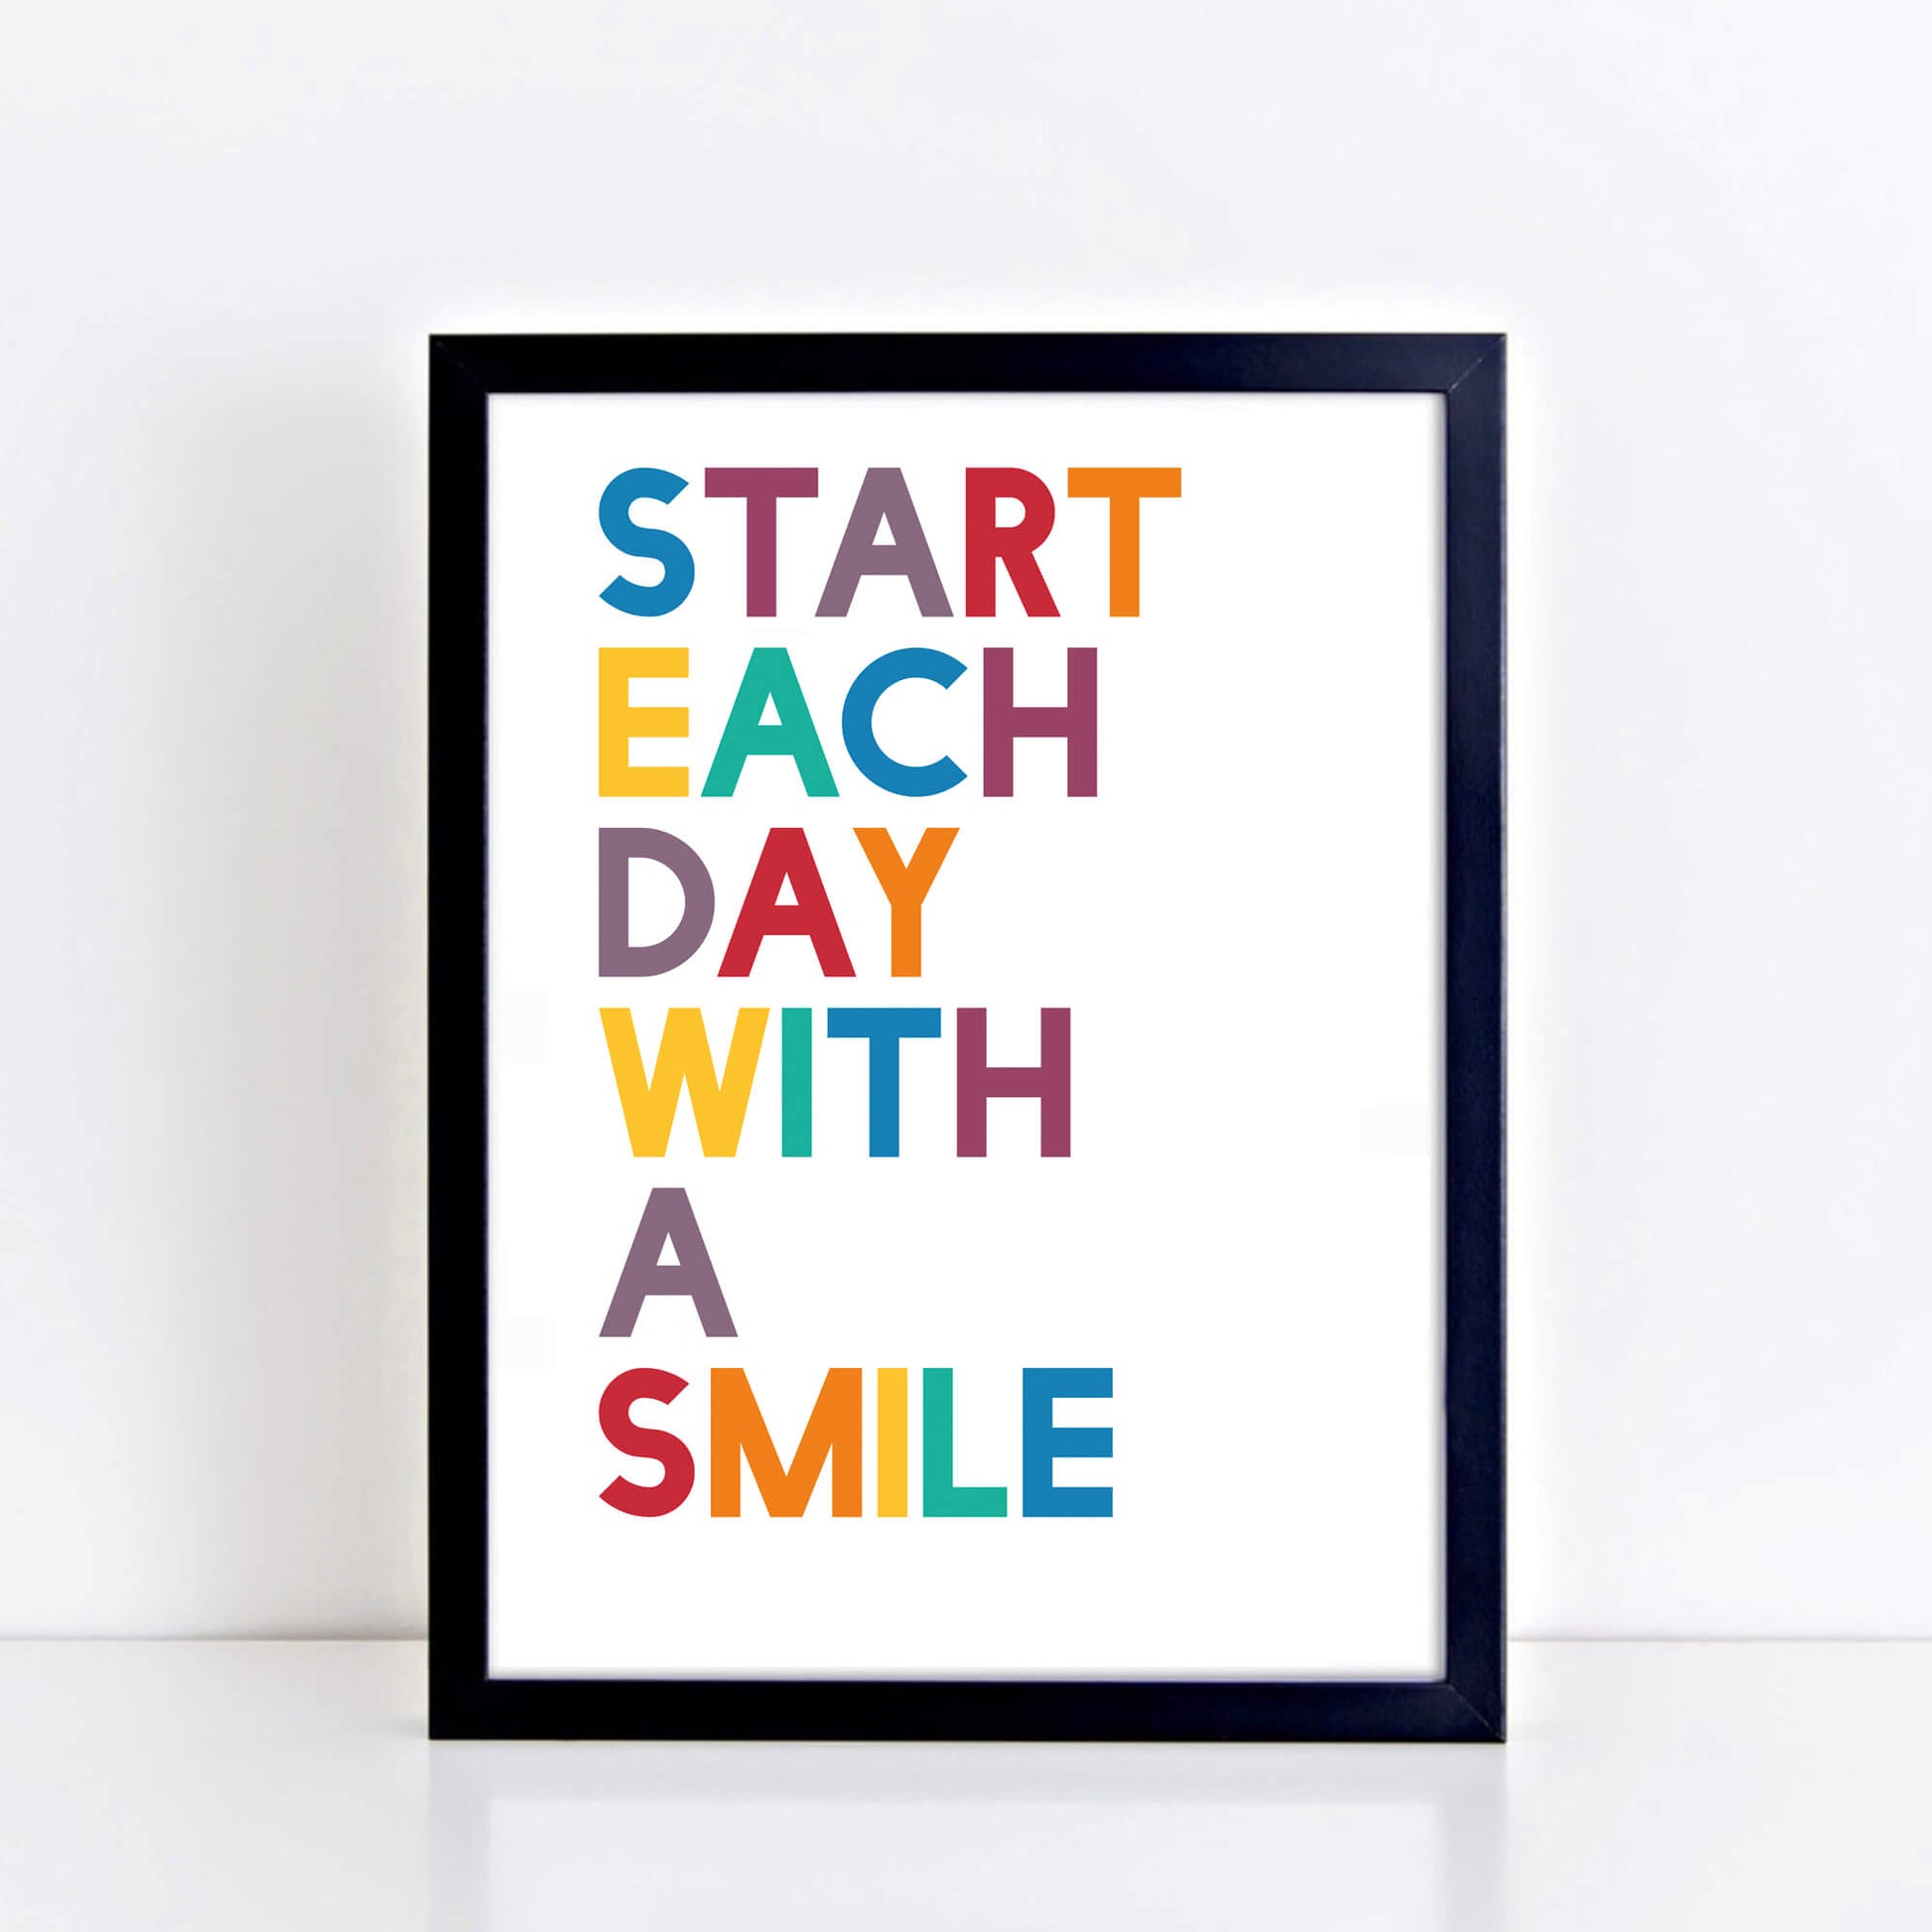 Start Each Day With A Smile Wallprint by SixElevenCreations. Product Code SEP0212